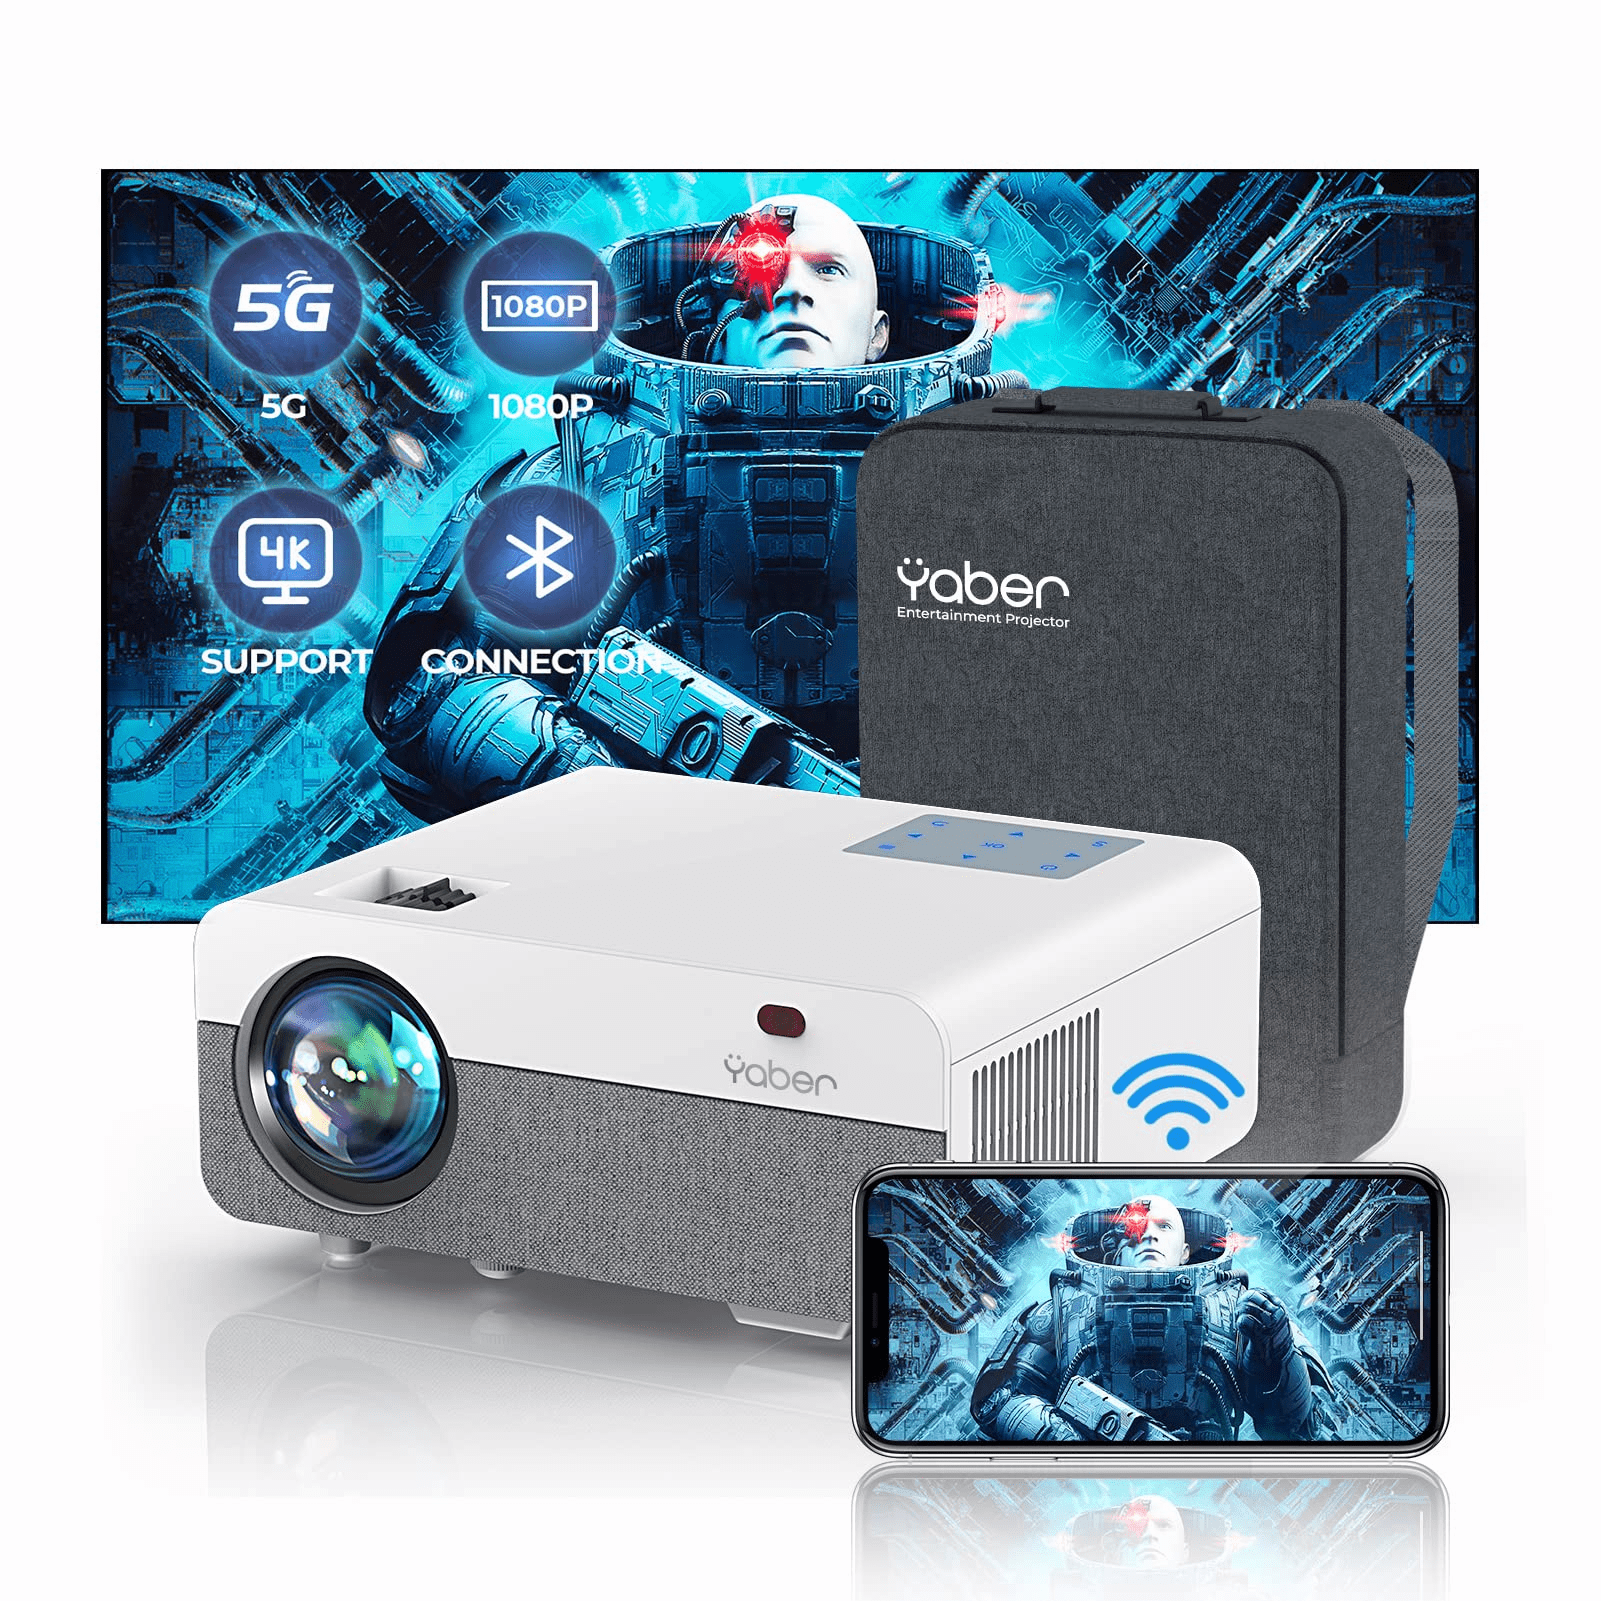 1920 x 1080 PC LCD LED Home & Outdoor Projector for iPhone PS4 Android TV Box Smartphone YABER Native 1080P Projector 5000 Lumens Full HD Video Projector ±50°4D Keystone Correction 